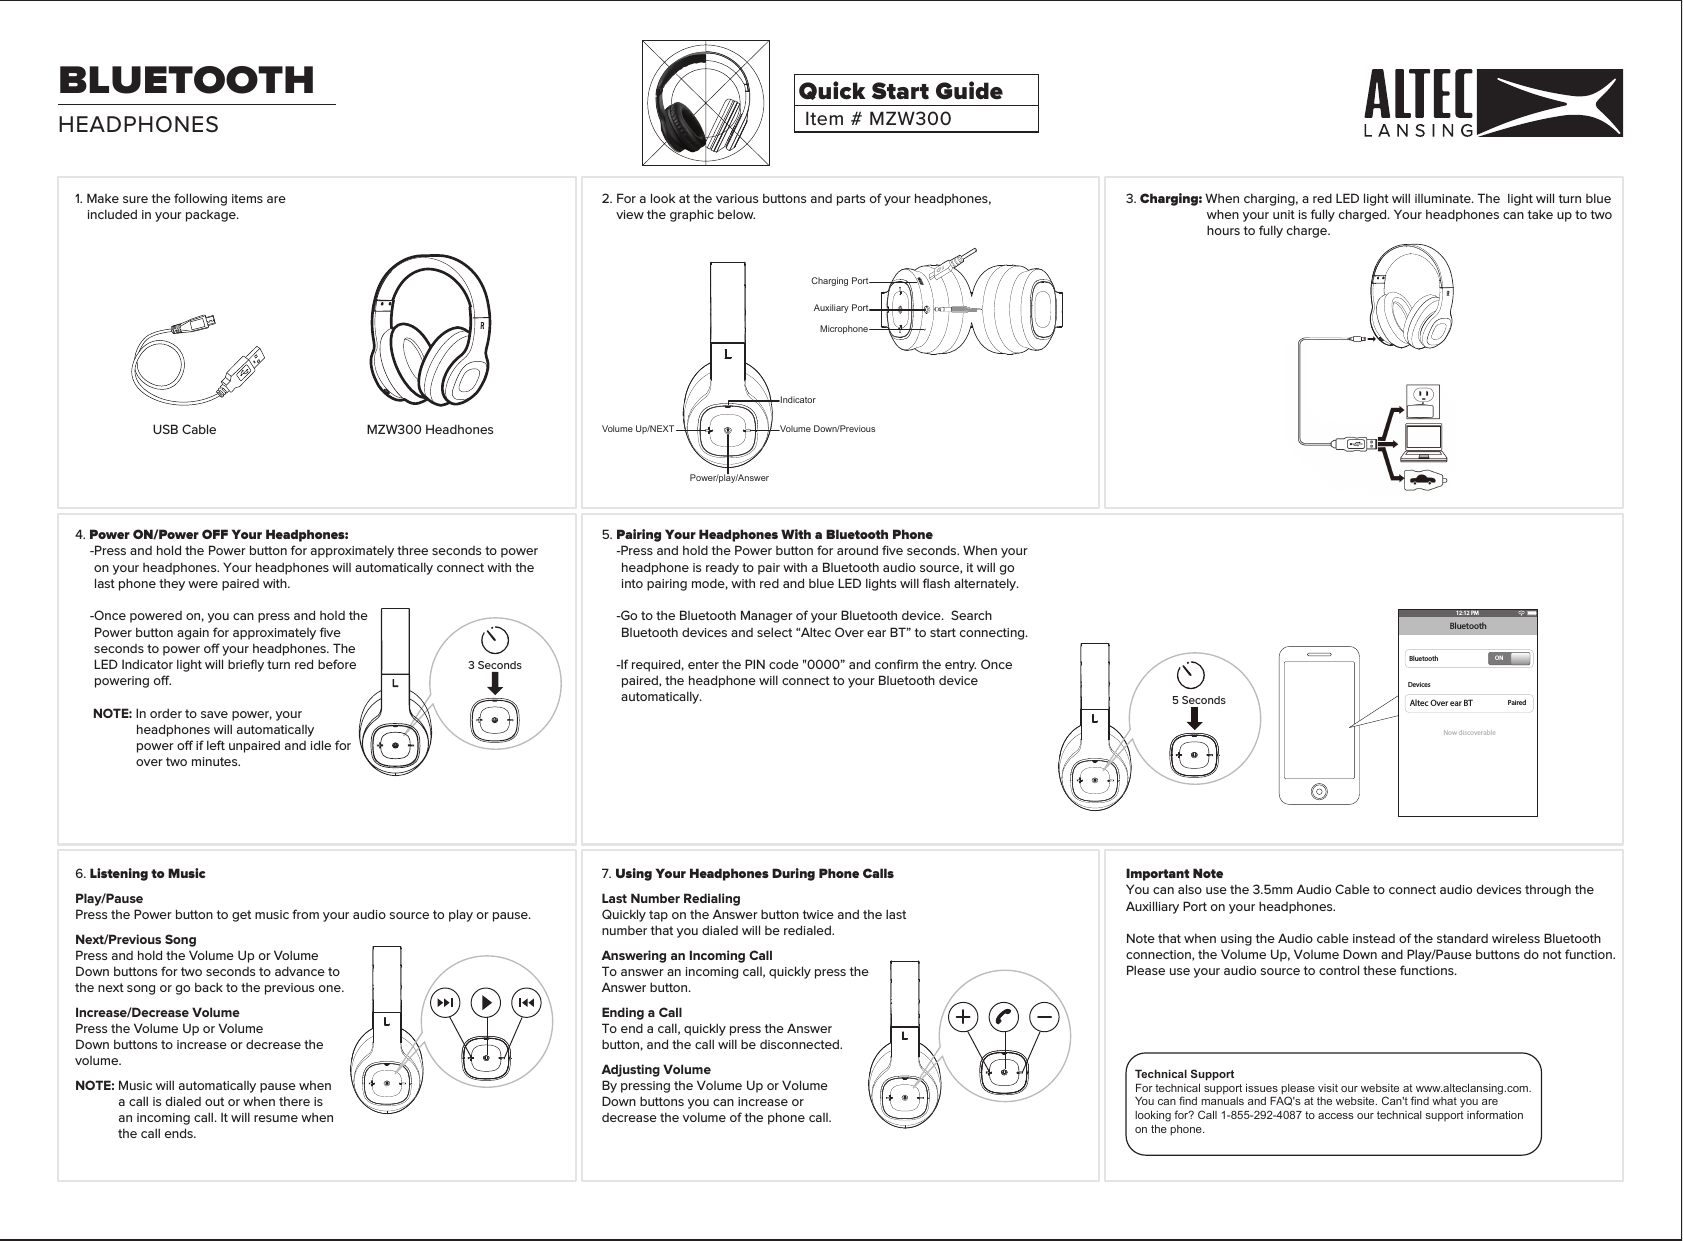 HEADPHONESBLUETOOTHUSB Cable3 Seconds12:12 PMBluetoothBluetoothDevicesPairedONNow discoverableAltec Over ear BT5 SecondsMZW300 Headhones3. Charging: When charging, a red LED light will illuminate. The  light will turn blue when your unit is fully charged. Your headphones can take up to two hours to fully charge.Important NoteYou can also use the 3.5mm Audio Cable to connect audio devices through the Auxilliary Port on your headphones.Note that when using the Audio cable instead of the standard wireless Bluetooth connection, the Volume Up, Volume Down and Play/Pause buttons do not function.Please use your audio source to control these functions. 2. For a look at the various buttons and parts of your headphones, view the graphic below.5. Pairing Your Headphones With a Bluetooth Phone-Press and hold the Power button for around ﬁve seconds. When your headphone is ready to pair with a Bluetooth audio source, it will go into pairing mode, with red and blue LED lights will ﬂash alternately. -Go to the Bluetooth Manager of your Bluetooth device.  Search Bluetooth devices and select “Altec Over ear BT” to start connecting.-If required, enter the PIN code &quot;0000” and conﬁrm the entry. Once paired, the headphone will connect to your Bluetooth device automatically.4. Power ON/Power OFF Your Headphones:-Press and hold the Power button for approximately three seconds to power on your headphones. Your headphones will automatically connect with the last phone they were paired with.  -Once powered on, you can press and hold the Power button again for approximately ﬁve seconds to power o your headphones. The LED Indicator light will brieﬂy turn red before powering o.NOTE: In order to save power, your headphones will automatically power o if left unpaired and idle for over two minutes.1. Make sure the following items are included in your package.Power/play/AnswerVolume Up/NEXT Volume Down/PreviousIndicatorMicrophoneCharging PortAuxiliary Port6. Listening to MusicPlay/PausePress the Power button to get music from your audio source to play or pause.Next/Previous SongPress and hold the Volume Up or Volume Down buttons for two seconds to advance to the next song or go back to the previous one.Increase/Decrease VolumePress the Volume Up or VolumeDown buttons to increase or decrease the volume.NOTE: Music will automatically pause when a call is dialed out or when there is an incoming call. It will resume when the call ends. 7. Using Your Headphones During Phone CallsLast Number RedialingQuickly tap on the Answer button twice and the last number that you dialed will be redialed.Answering an Incoming CallTo answer an incoming call, quickly press the Answer button.Ending a CallTo end a call, quickly press the Answer button, and the call will be disconnected.Adjusting VolumeBy pressing the Volume Up or Volume Down buttons you can increase or decrease the volume of the phone call.Item # MZW300Quick Start GuideTechnical SupportFor technical support issues please visit our website at www.alteclansing.com.You can find manuals and FAQ&apos;s at the website. Can&apos;t find what you are looking for? Call 1-855-292-4087 to access our technical support information on the phone.